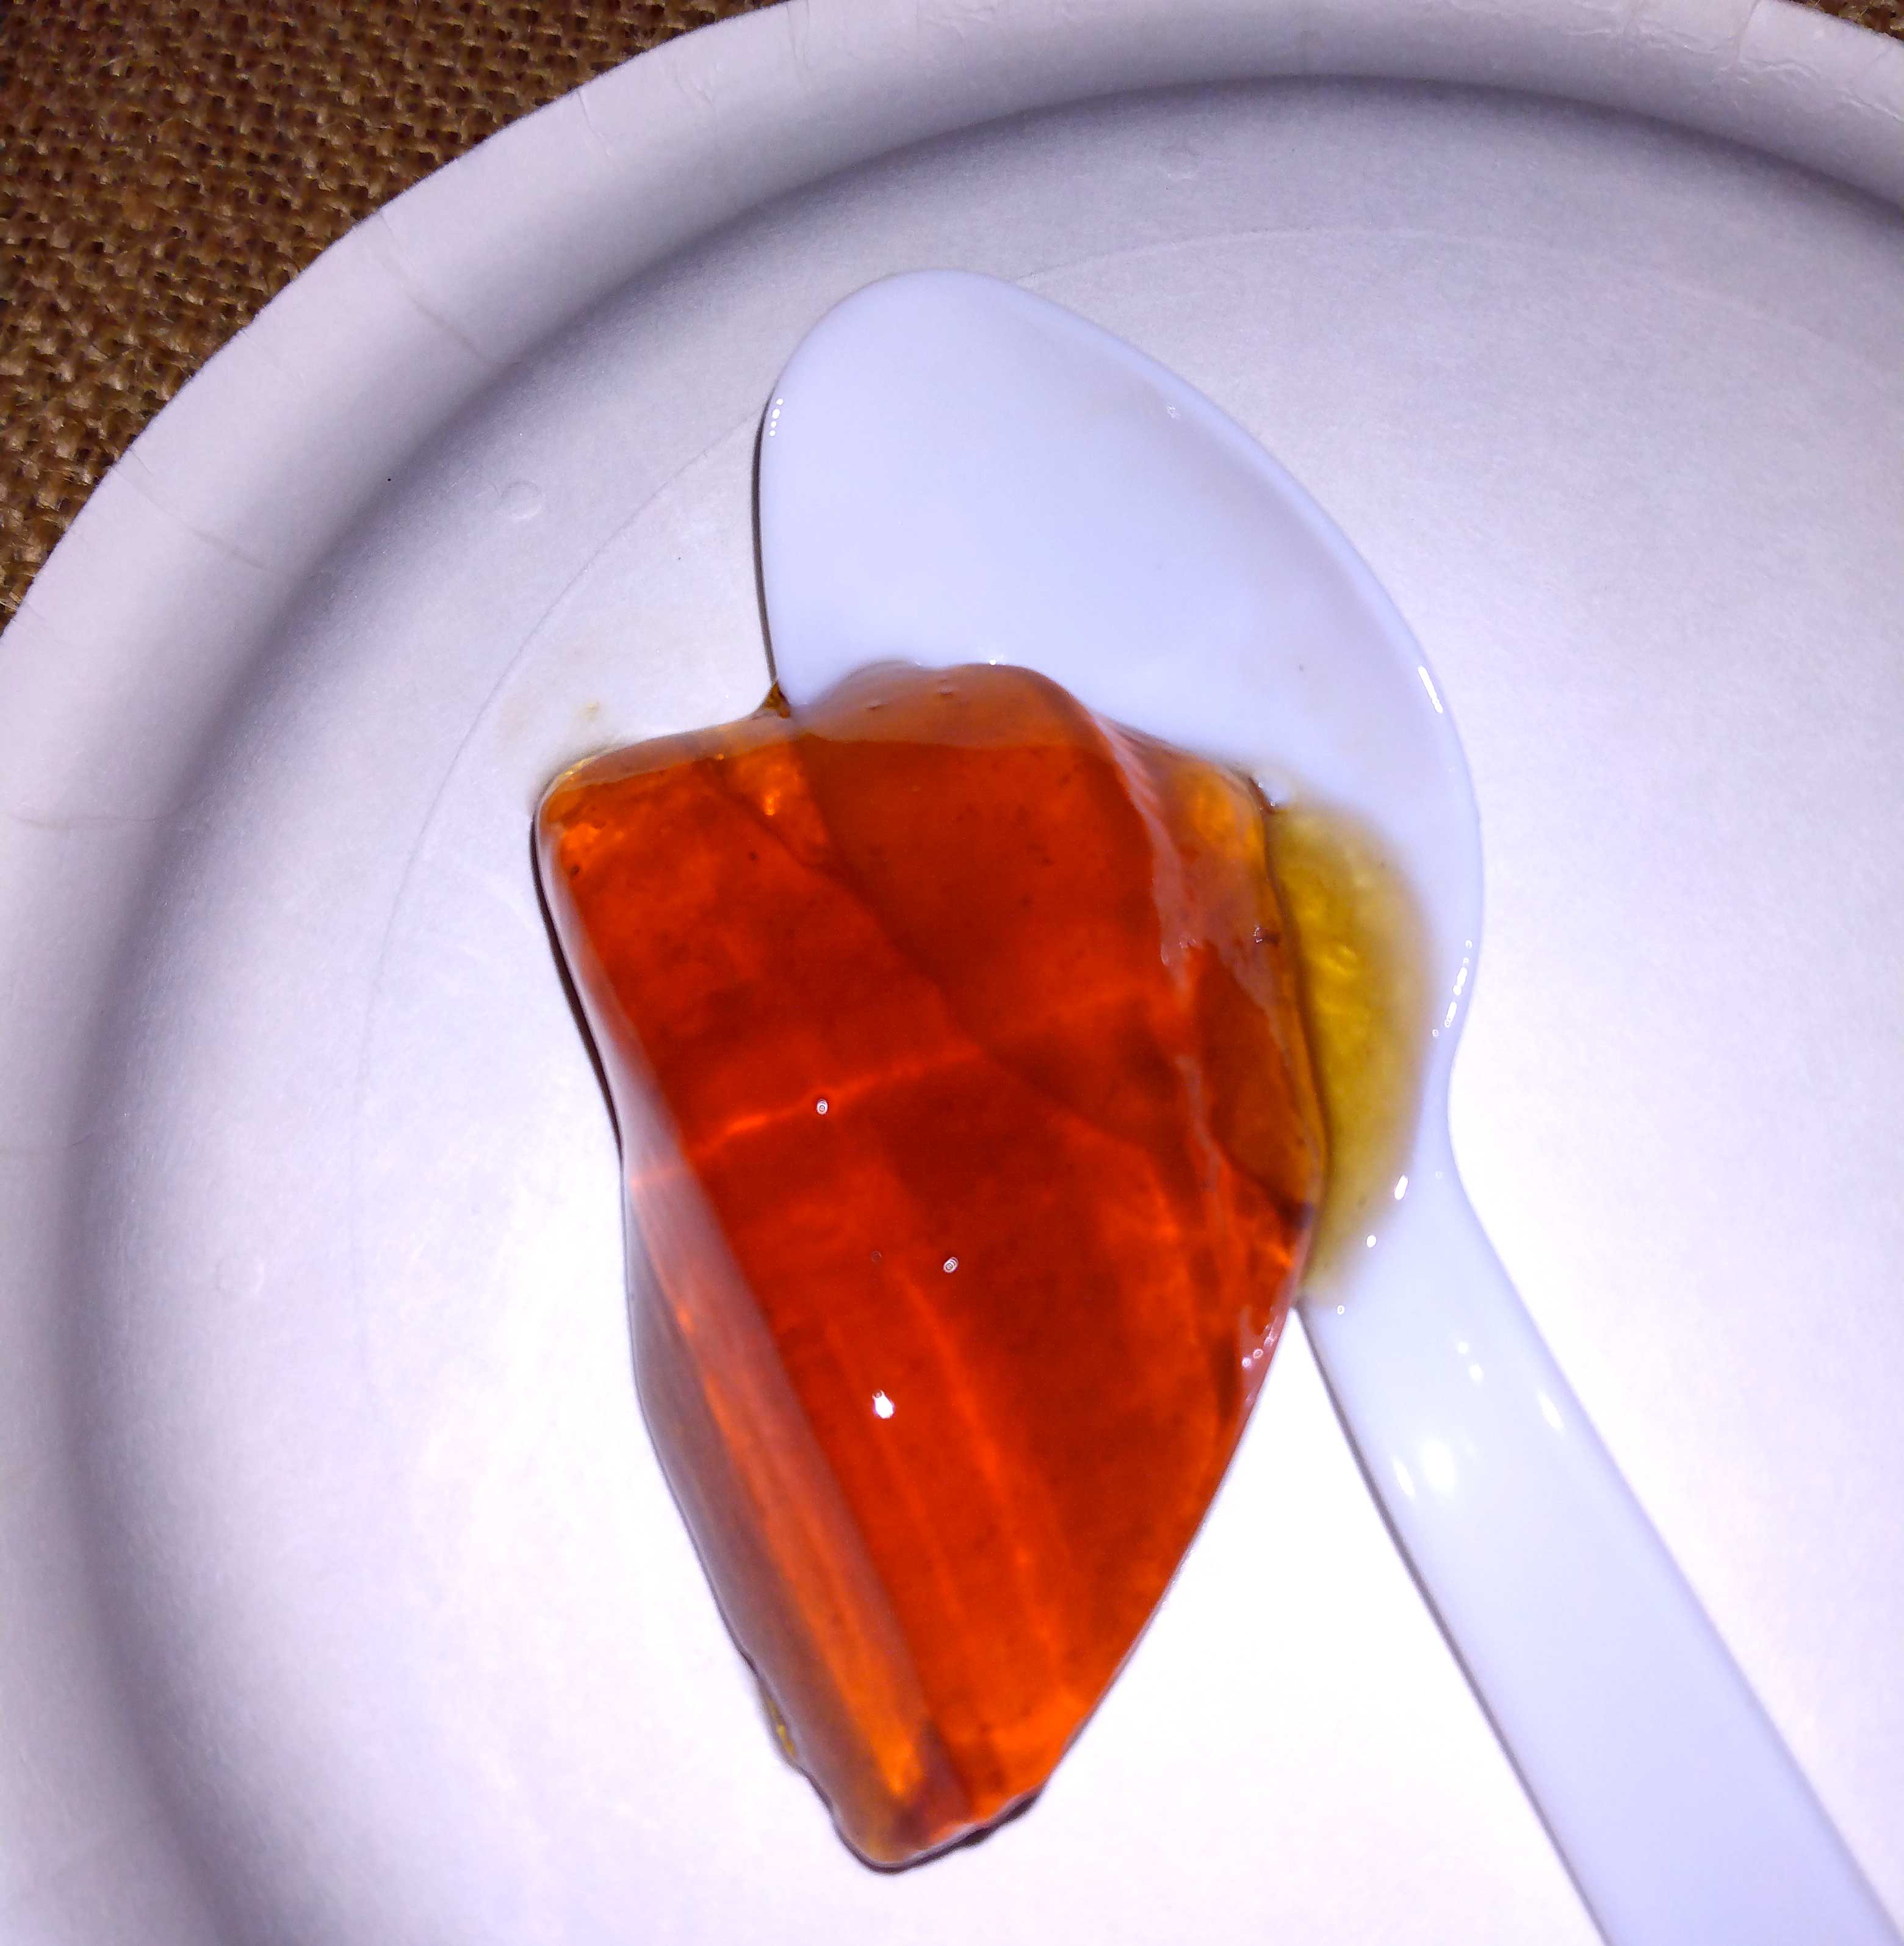 spoon with a blob of homeade jelly on it